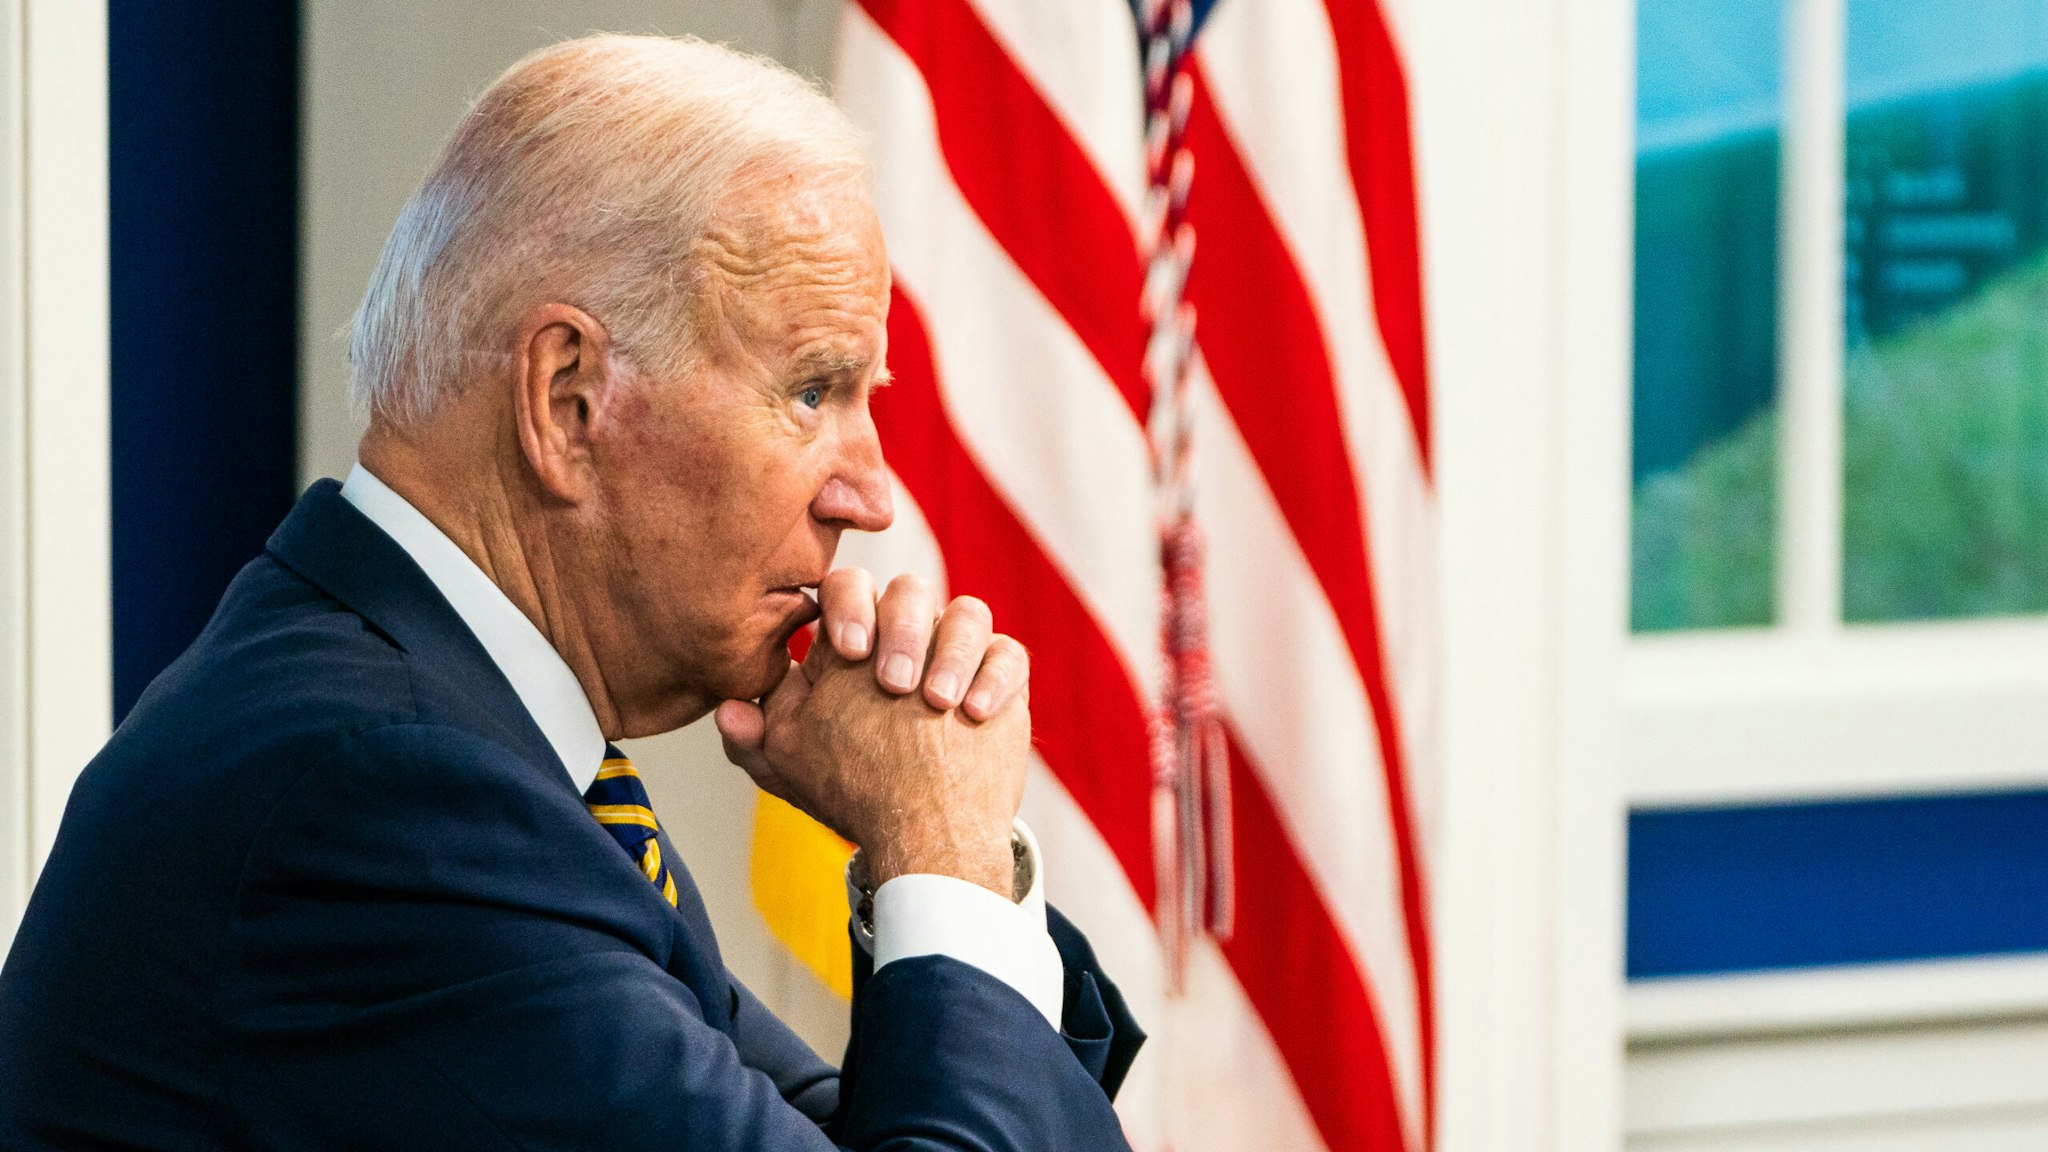 WASHINGTON, DC September 17, 2021: US President Joe Biden during the Major Economies Forum on Energy and Climate (MEF) to galvanize efforts to confront the global climate crisis in the South Court Auditorium at the White House on September 17, 2021.